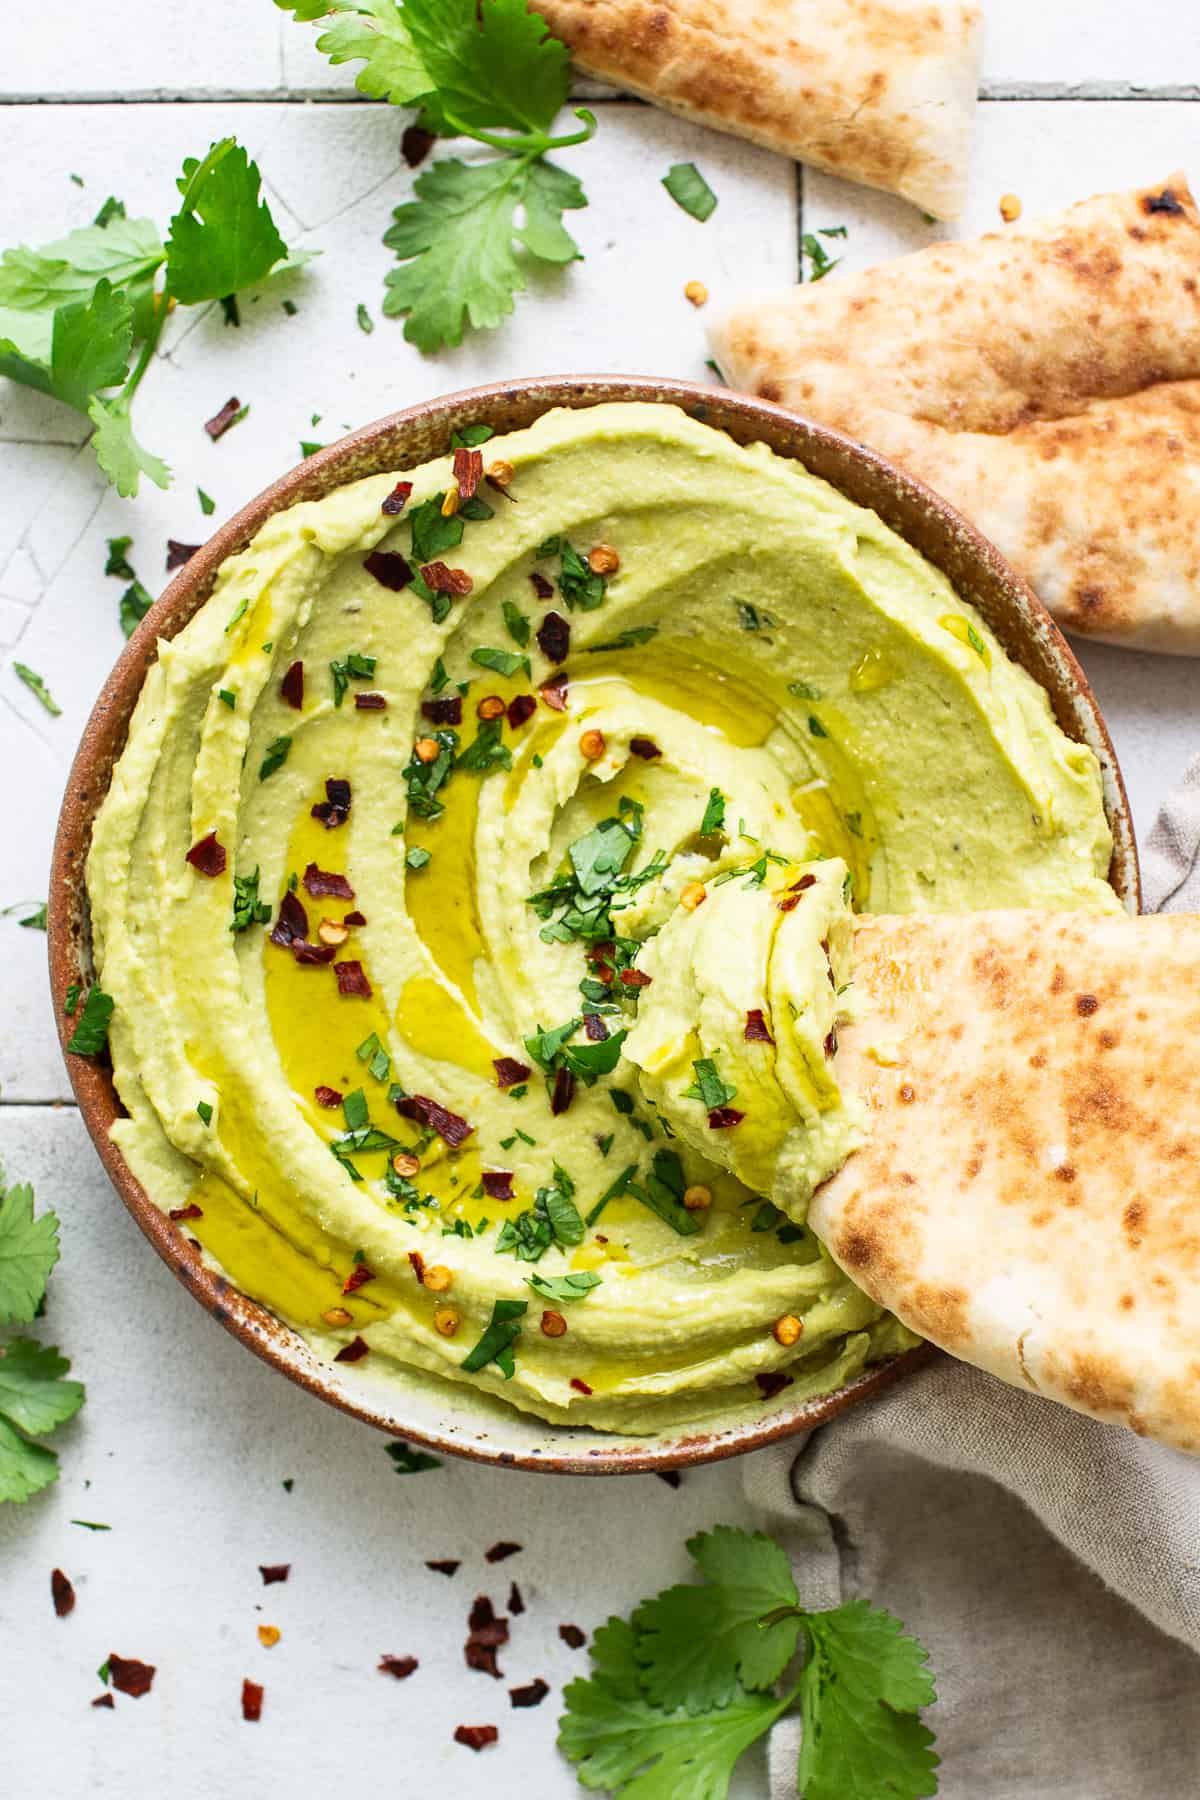 A slice of pita bread being dipped in a bowl of avocado hummus.